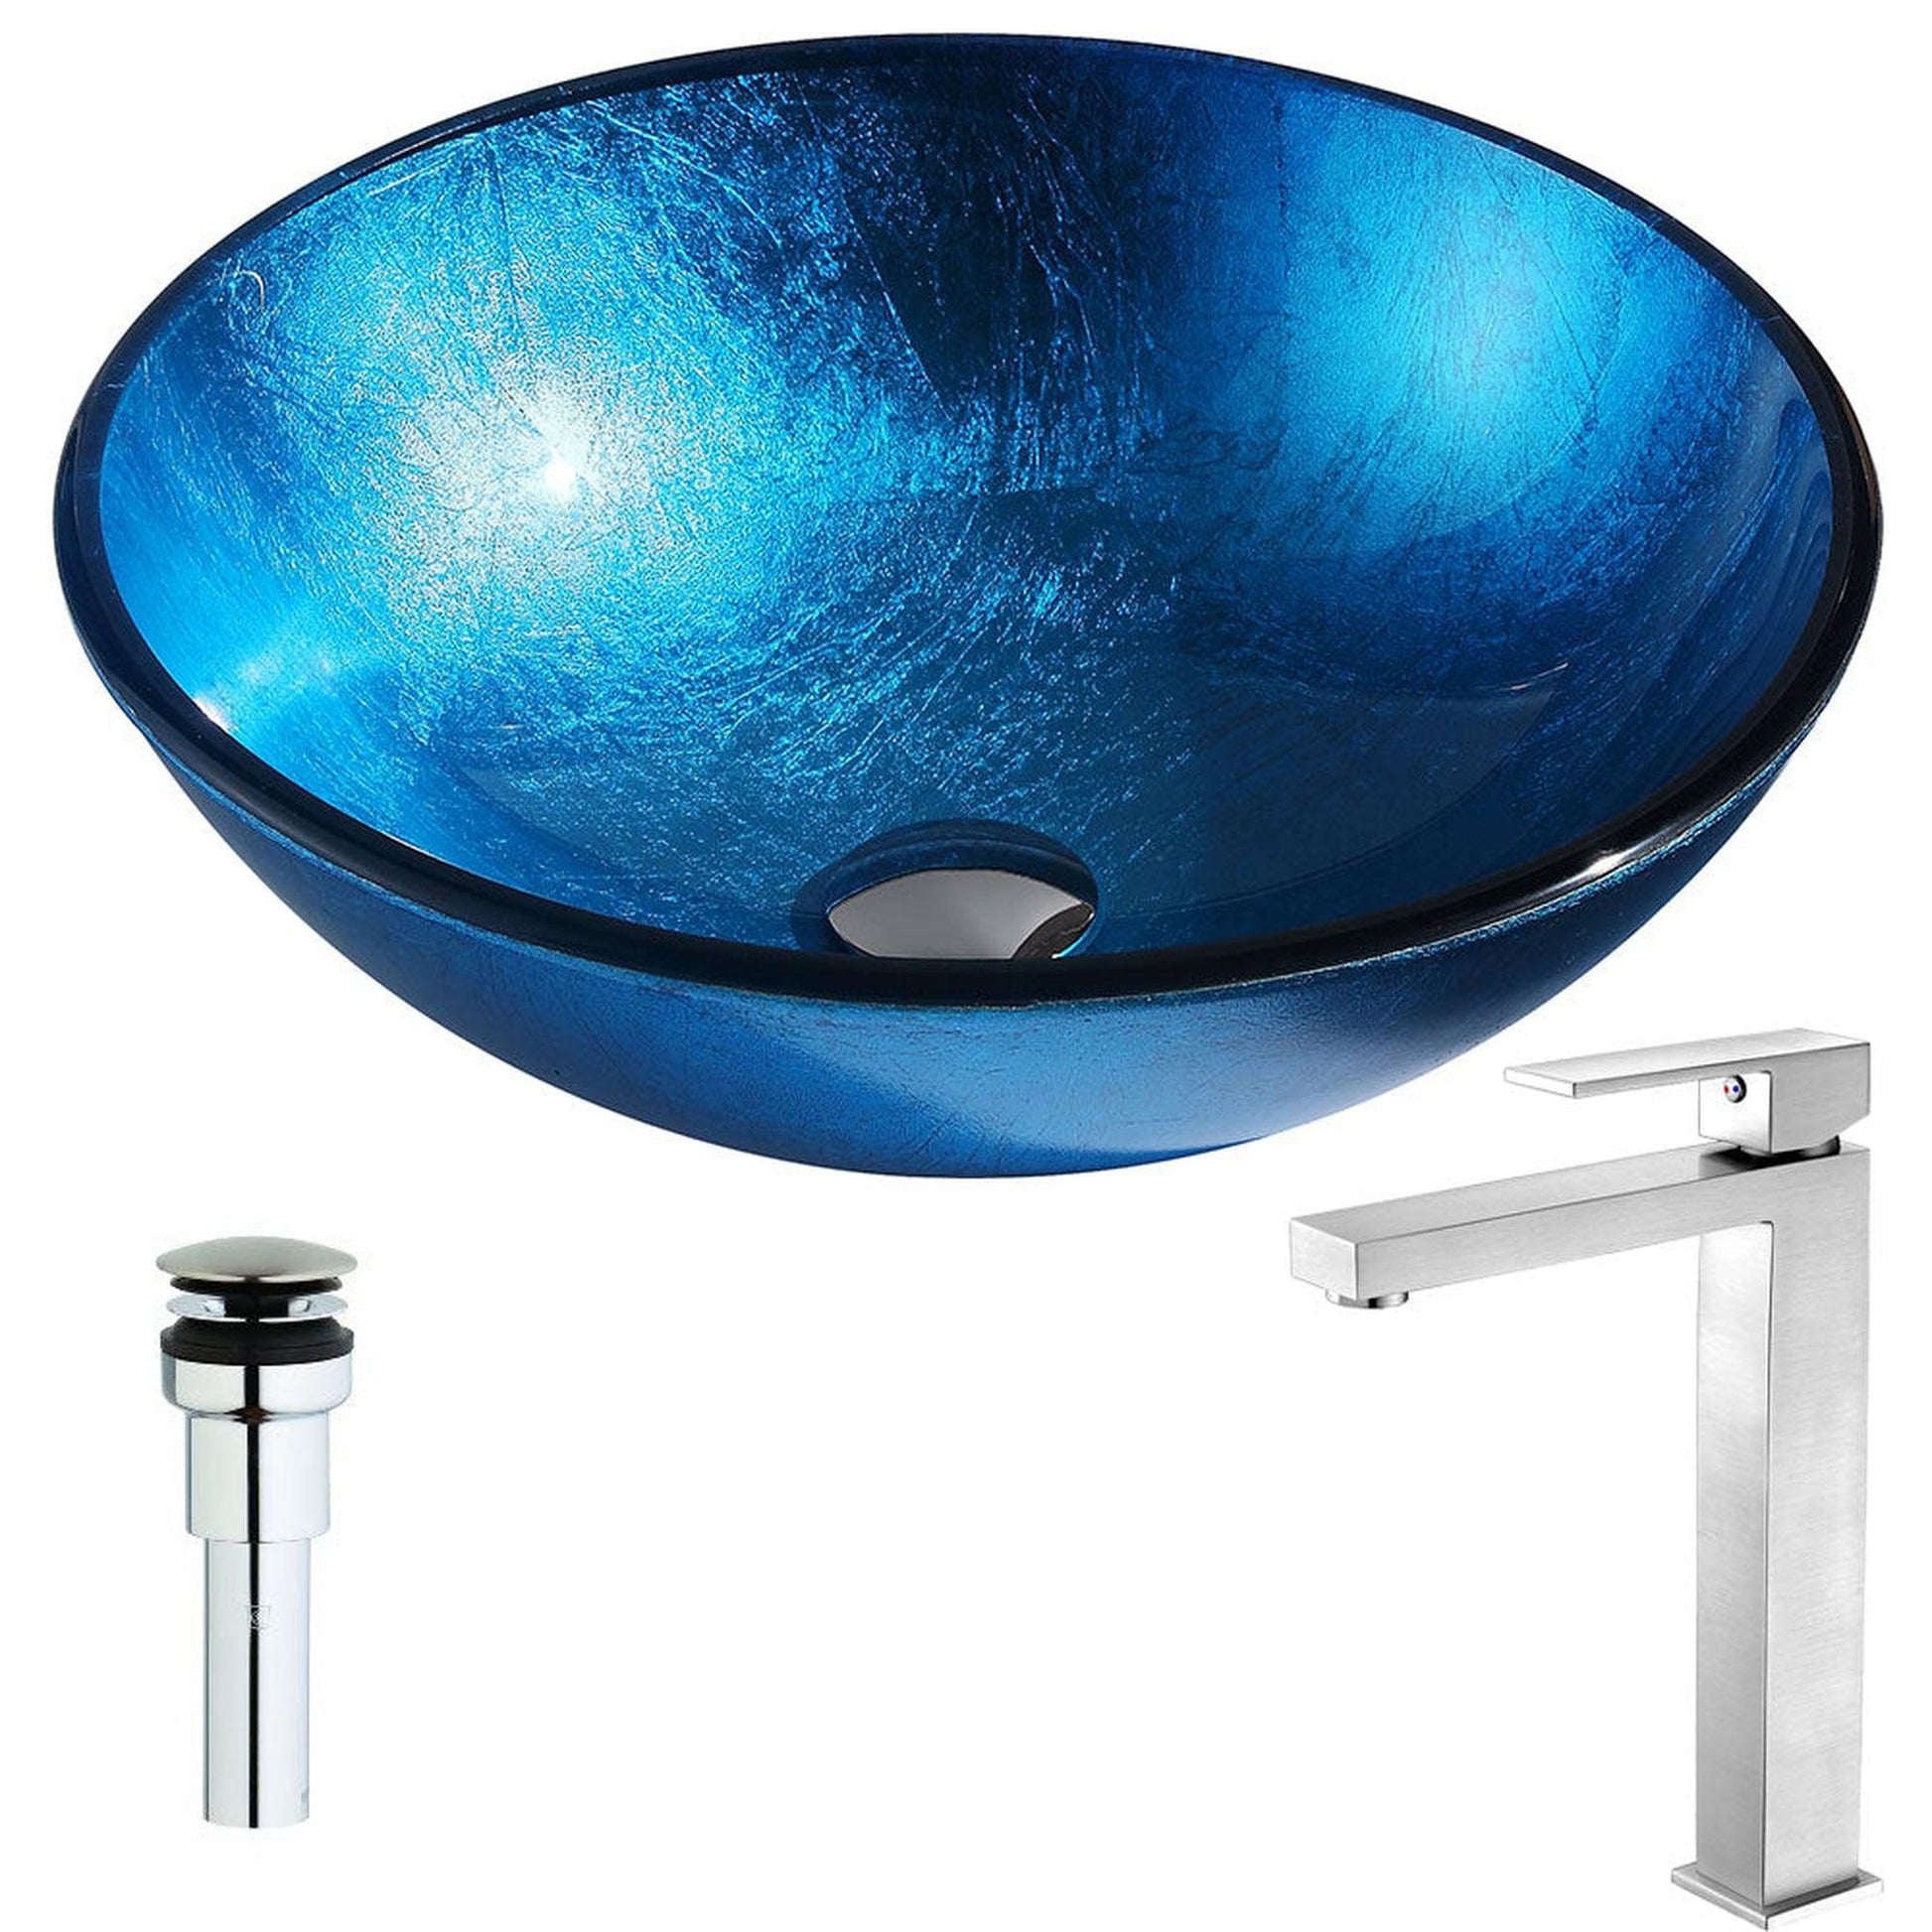 ANZZI Arc Series 17" x 17" Round Lustrous Light Blue Deco-Glass Vessel Sink With Chrome Pop-Up Drain and Brushed Nickel Enti Faucet